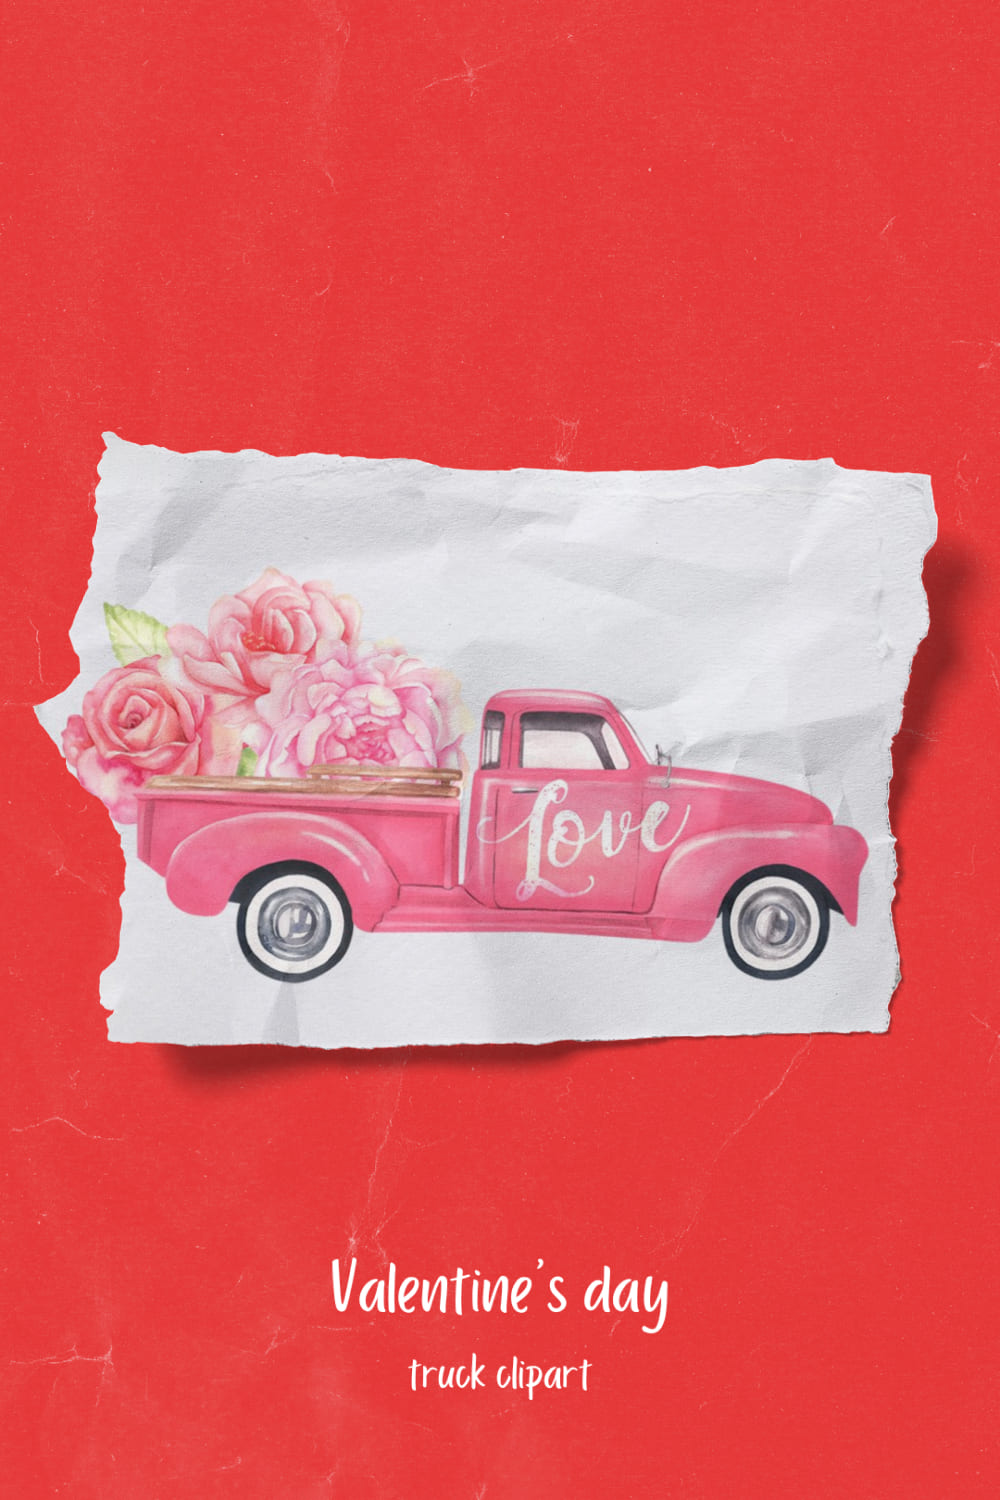 Valentines day truck clipart images of pinterest.